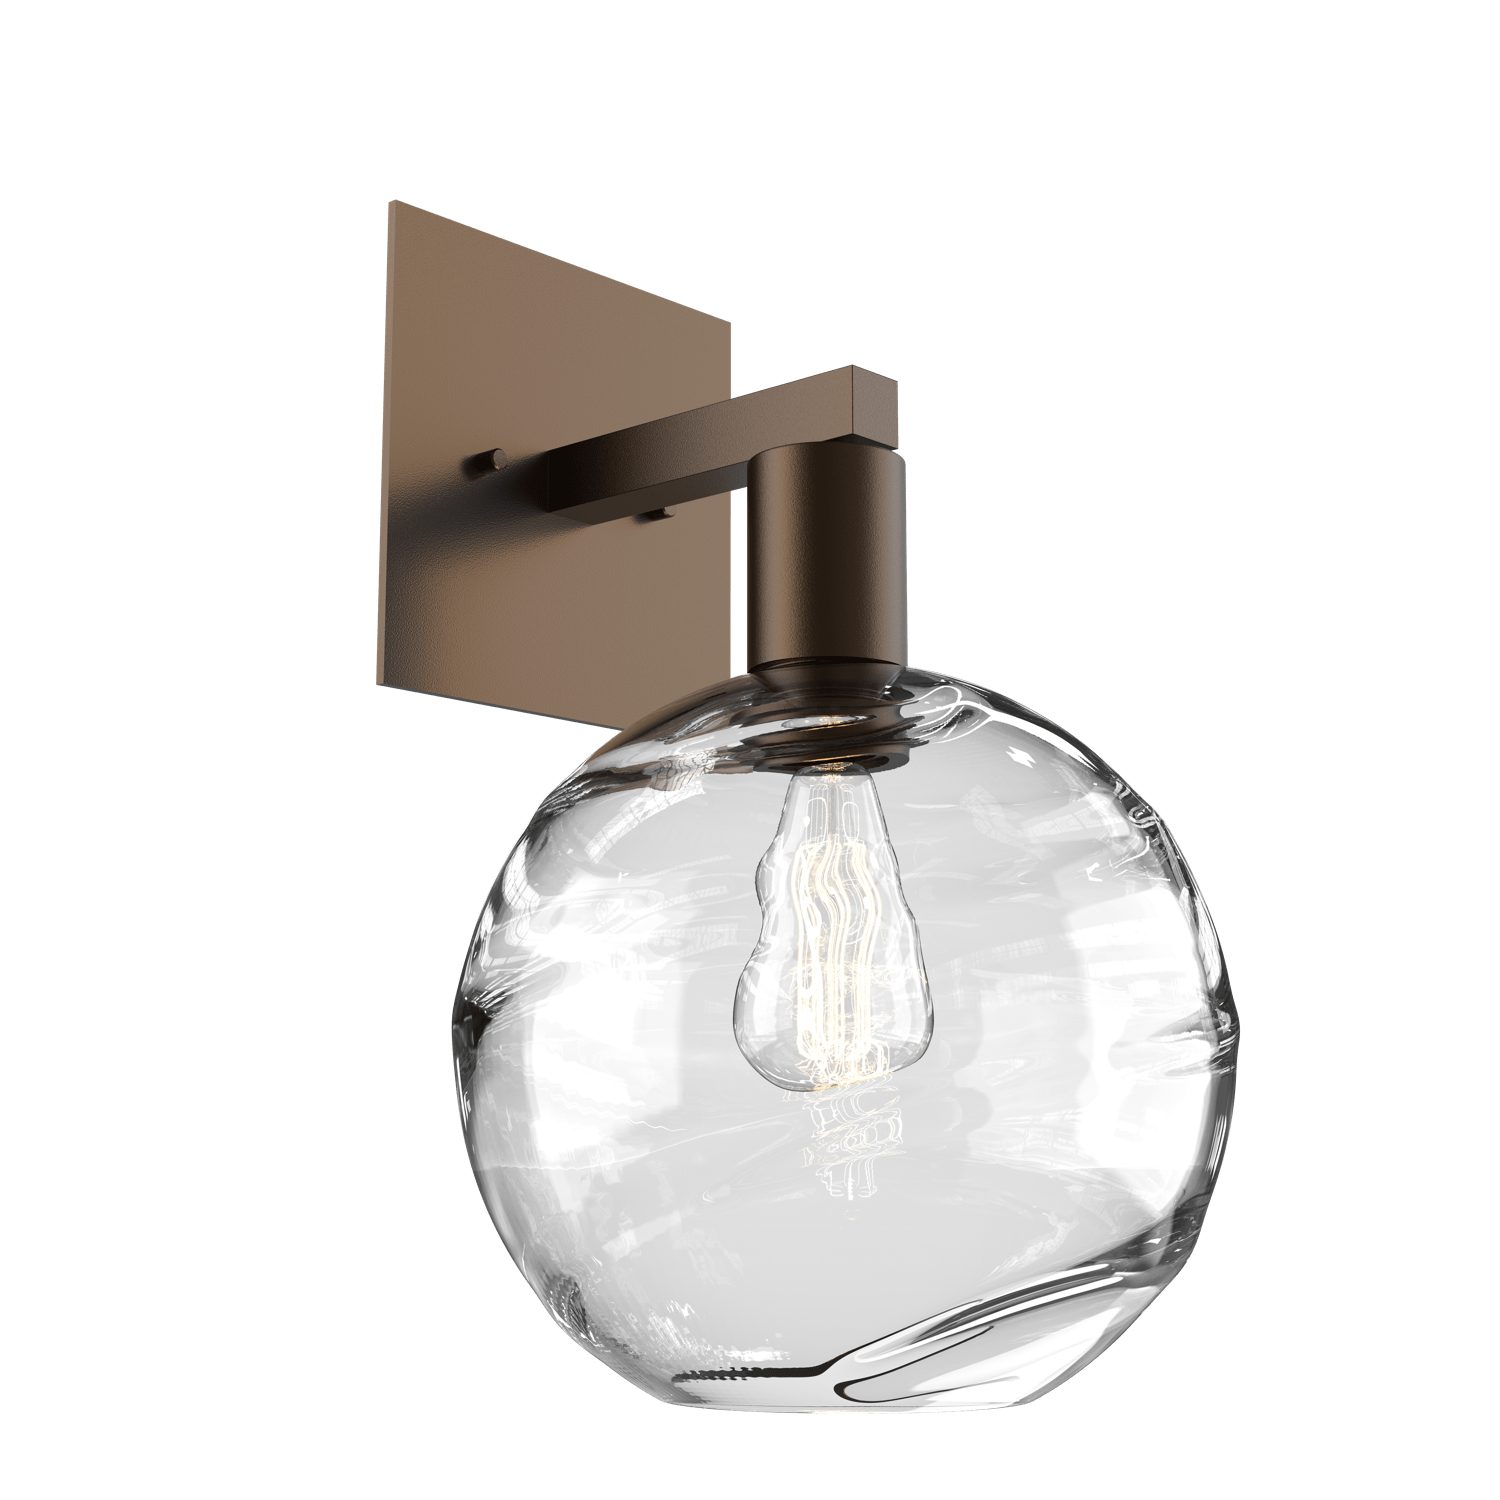 IDB0047-14-FB-OC-Hammerton-Studio-Optic-Blown-Glass-Terra-wall-sconce-with-flat-bronze-finish-and-optic-clear-blown-glass-shades-and-incandescent-lamping